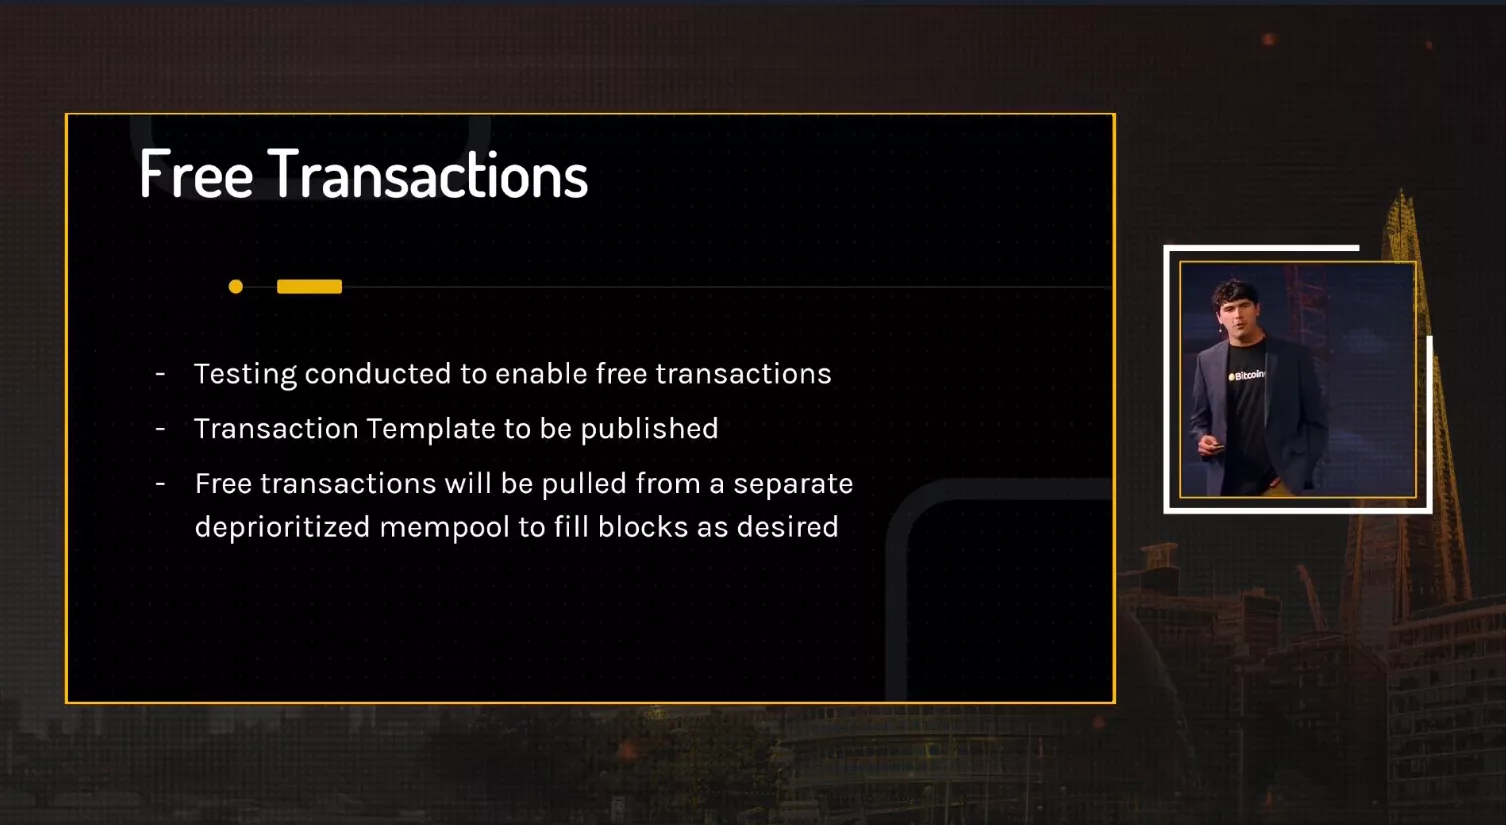 Connor Murray Free Transactions slide